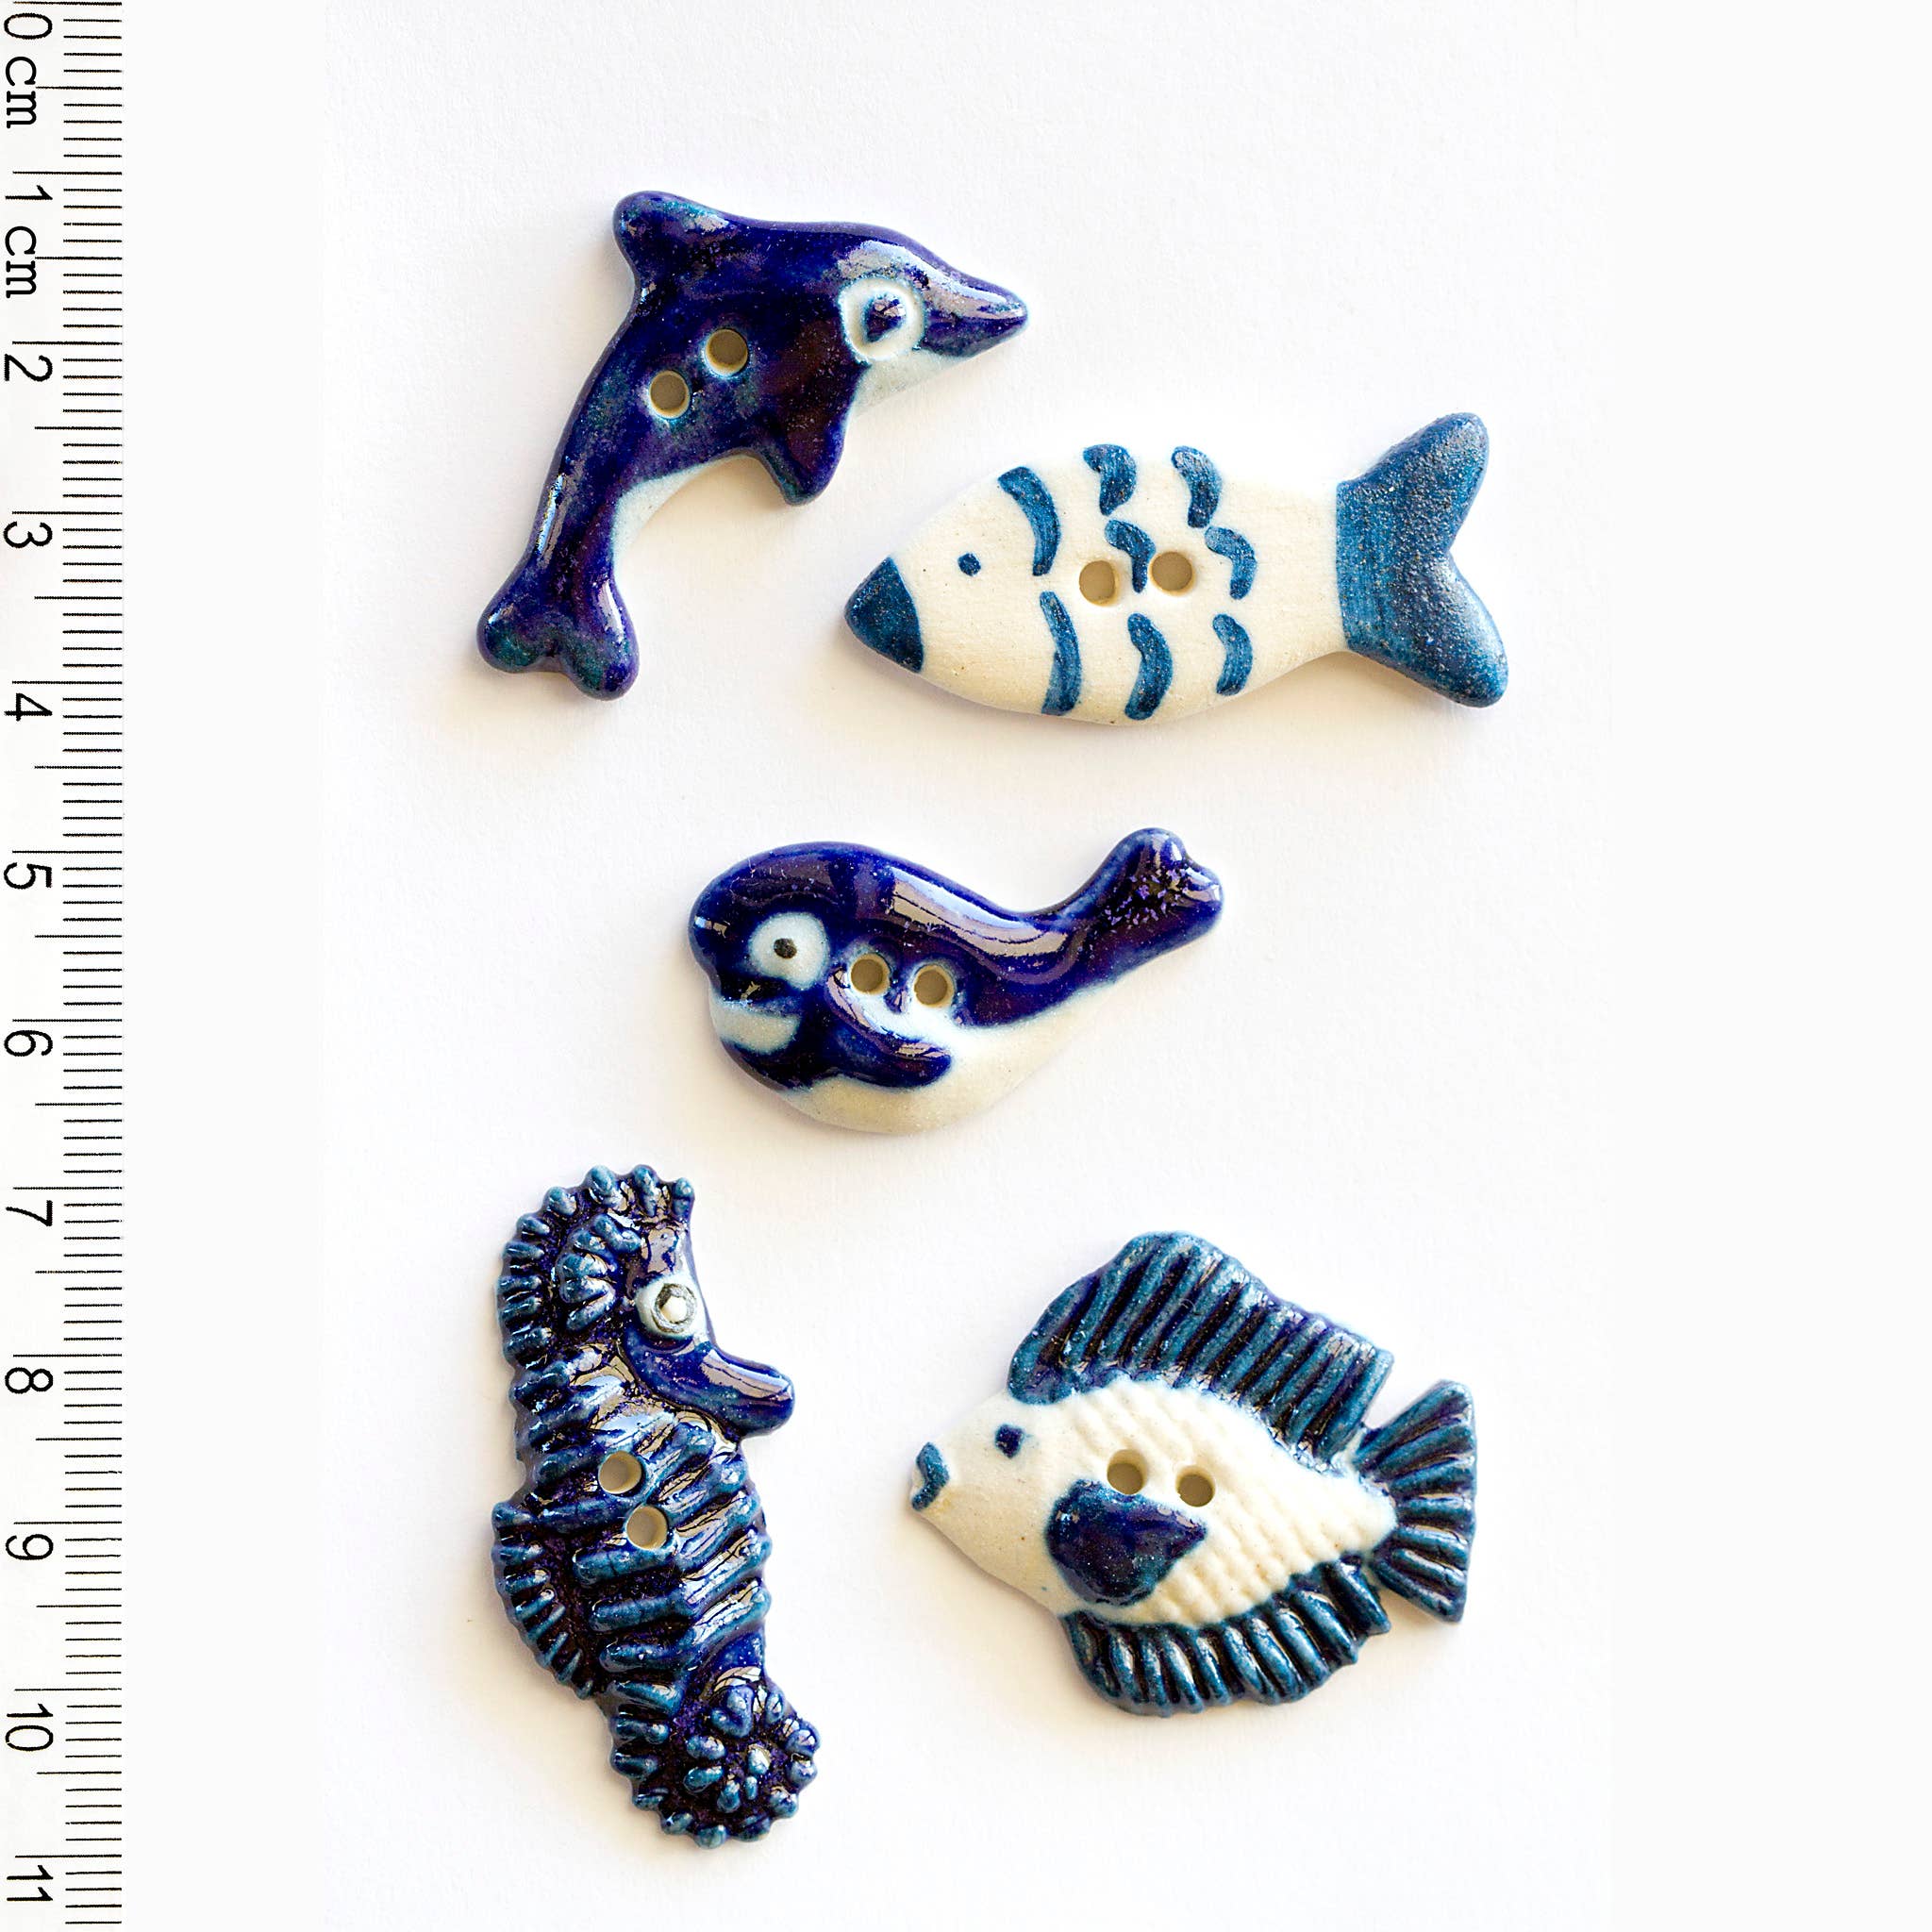 Incomparable Buttons - 5 Sea Life Buttons